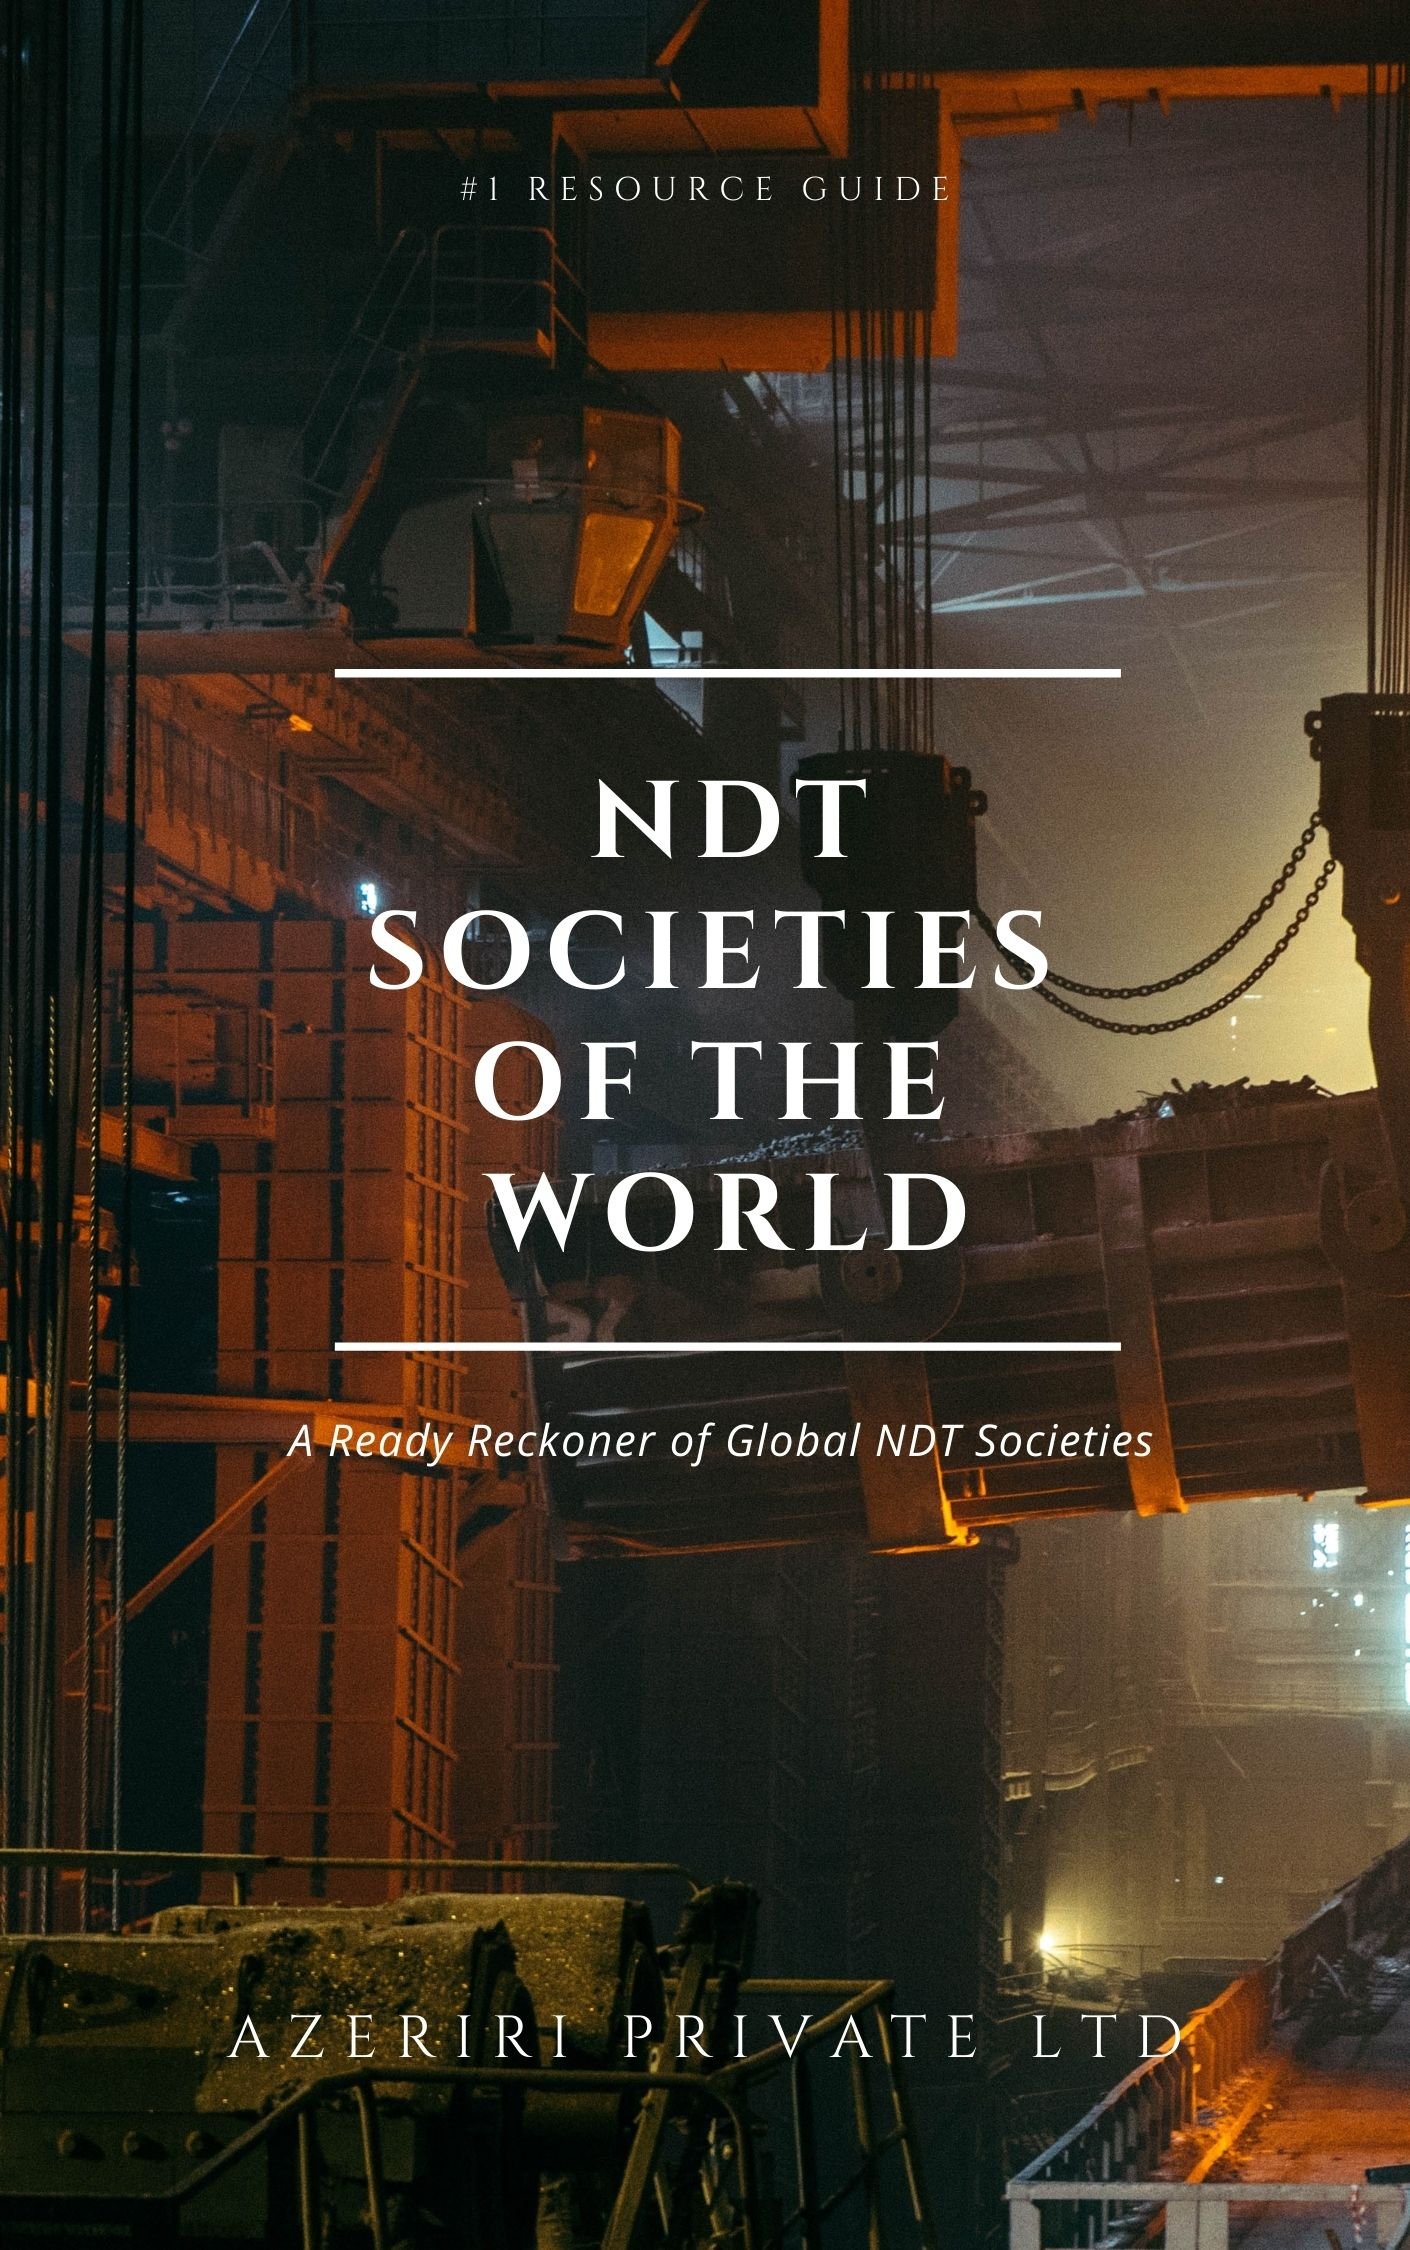 NDT Societies of the world